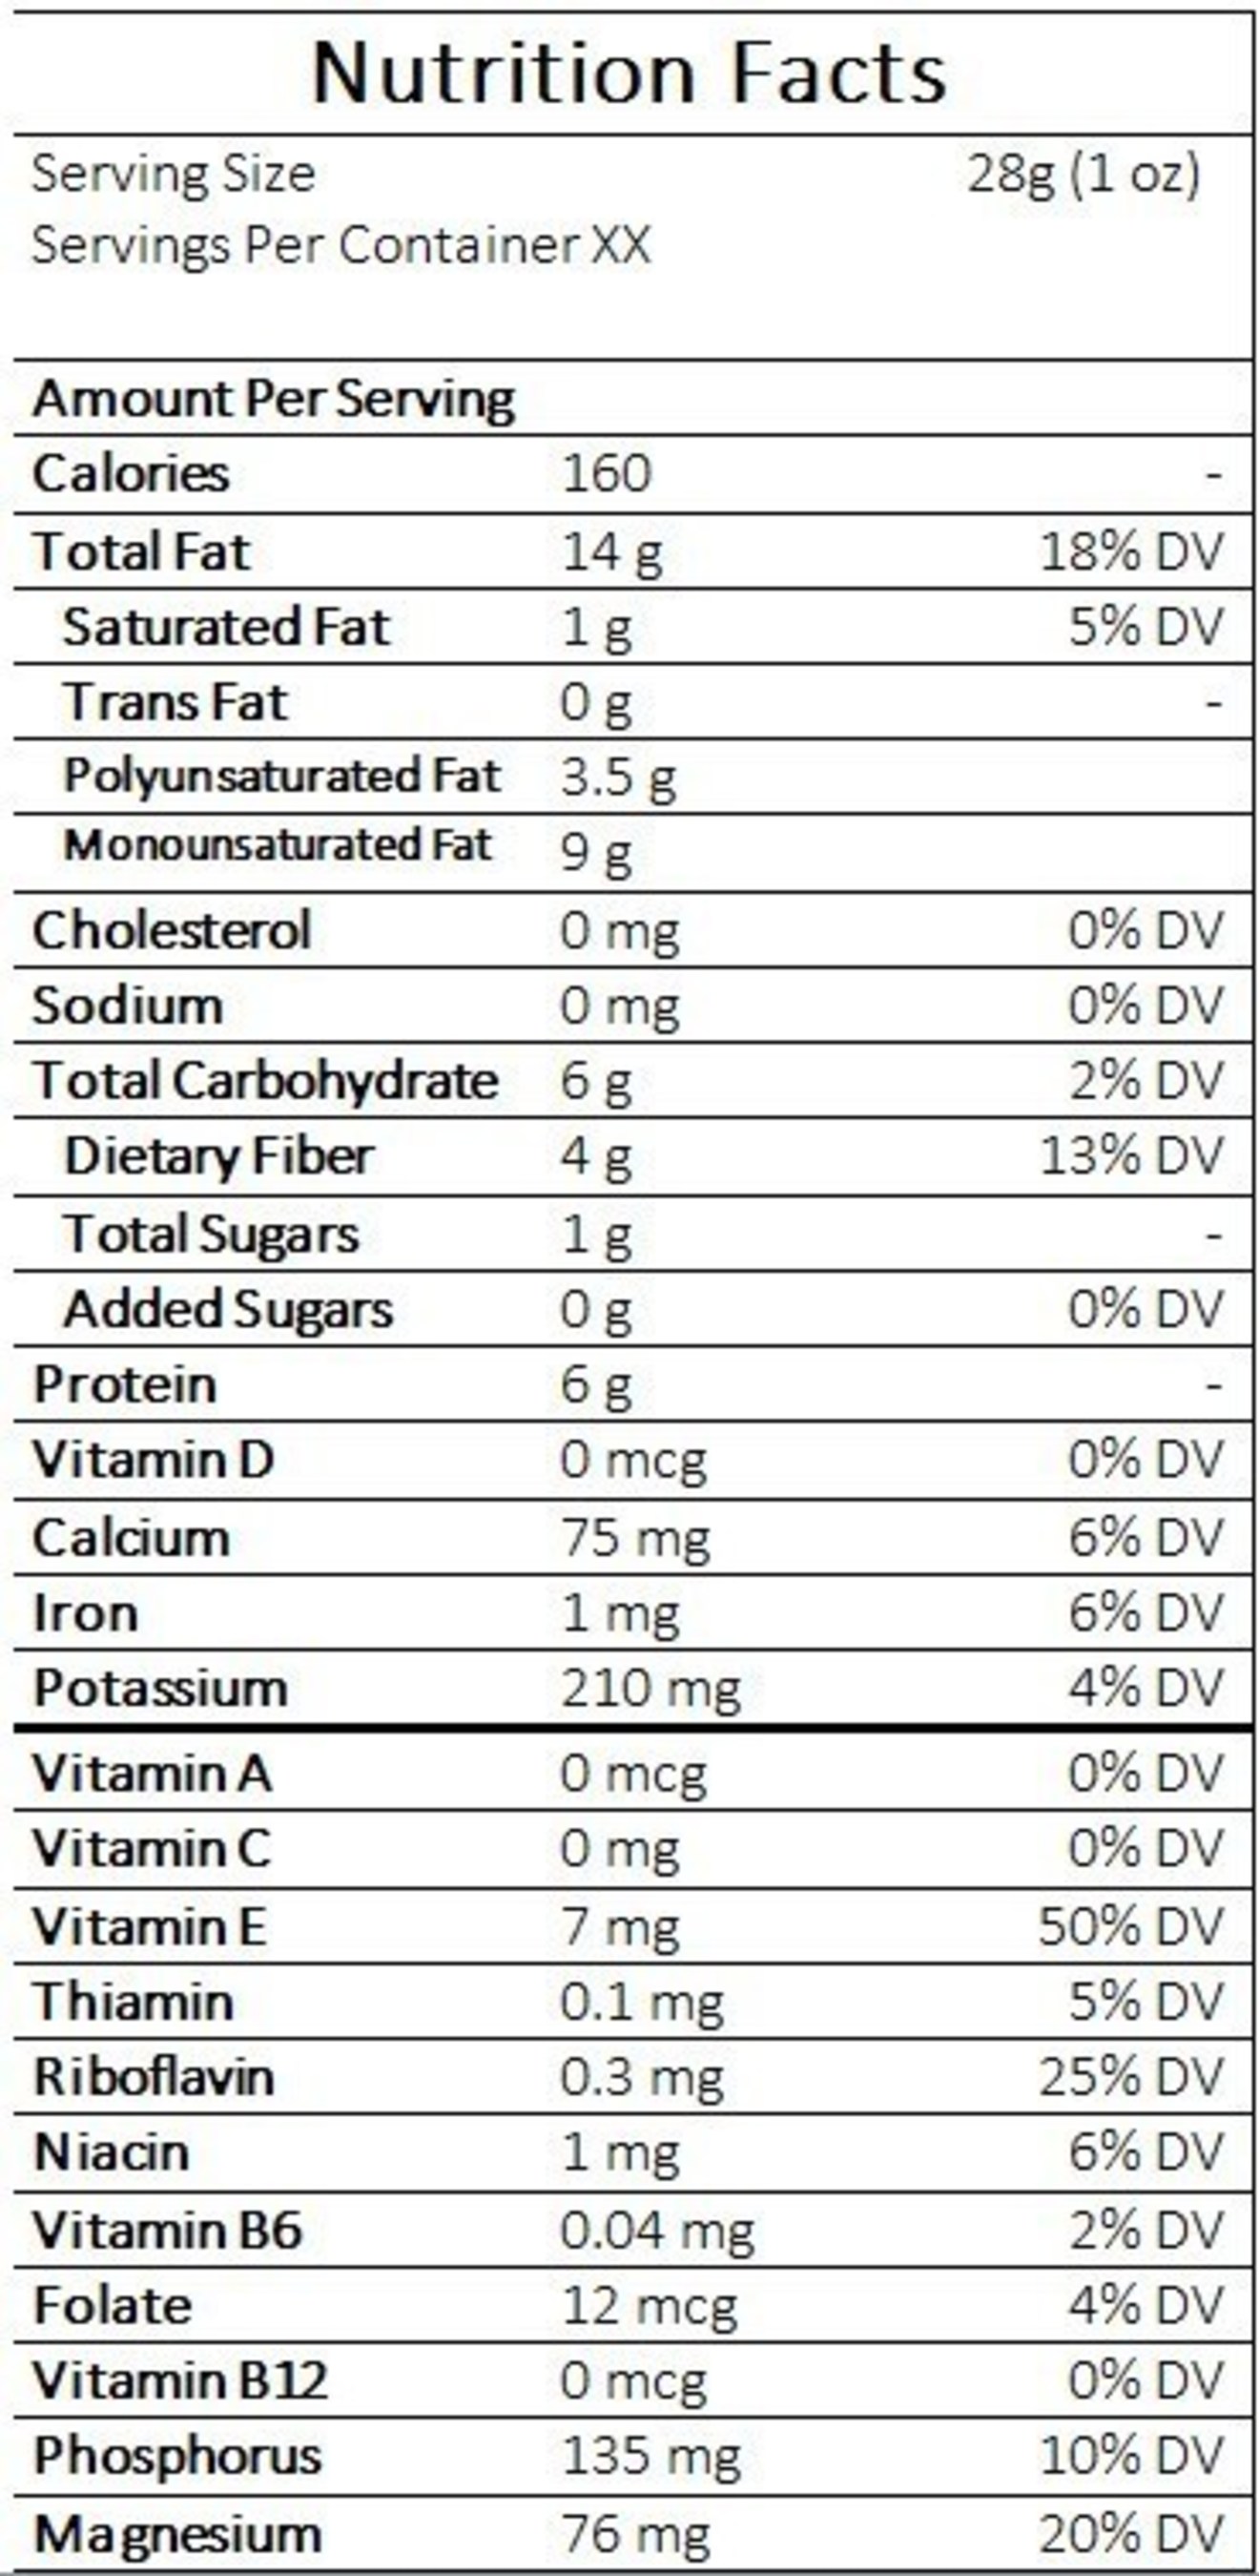 Nutrition Facts Label for Almonds